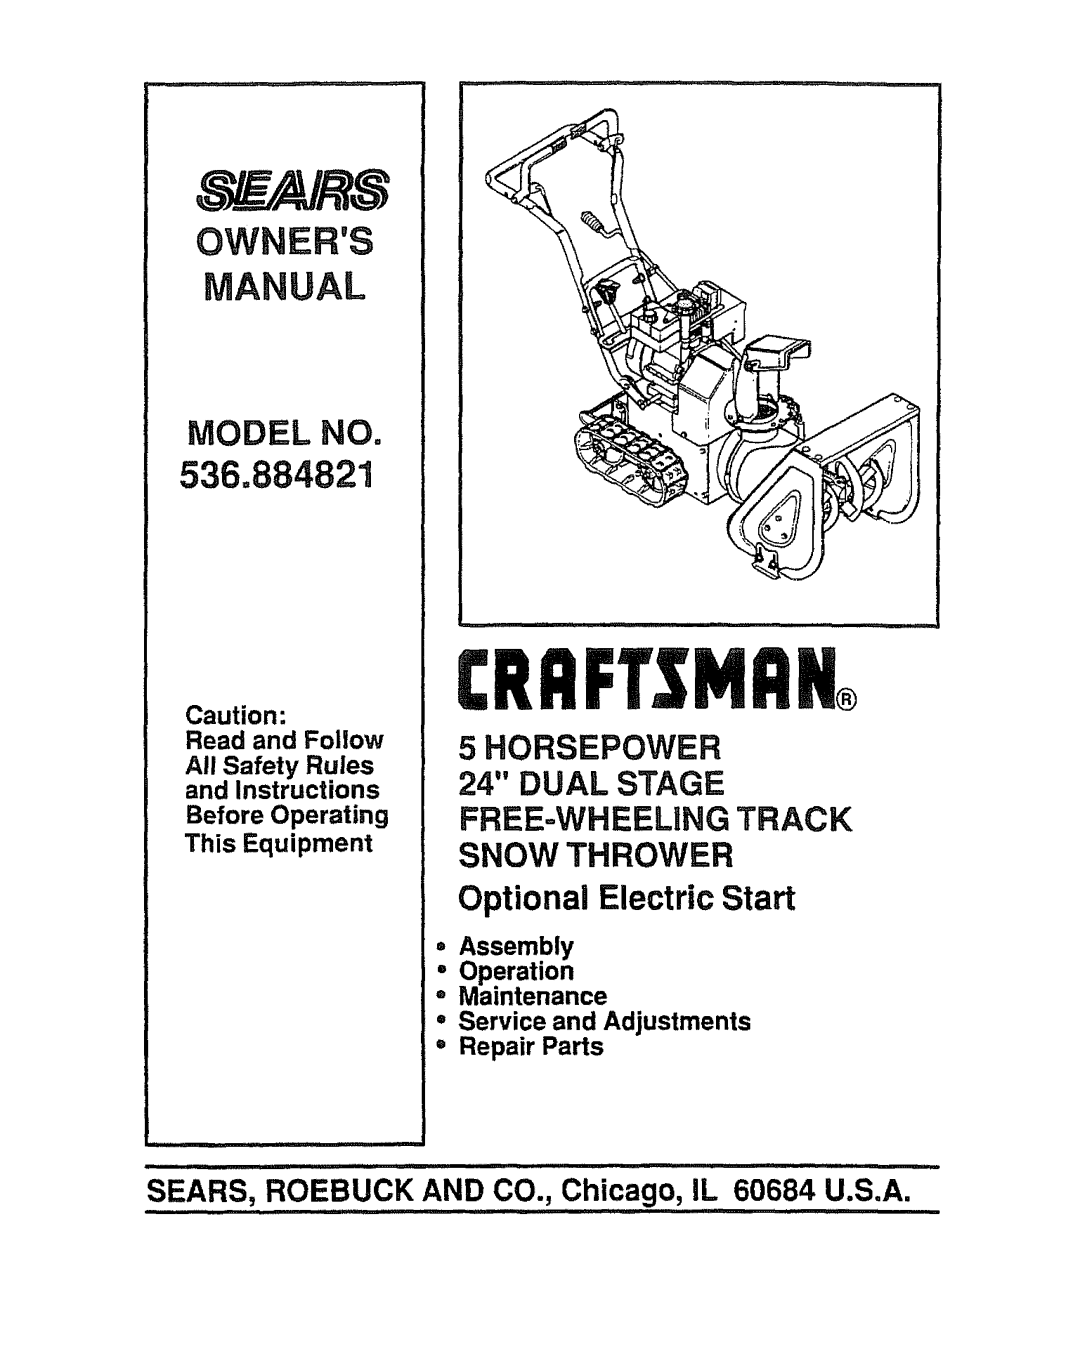 Sears 536.884821 manual Owners Mahual, Model No, 5HORSEPOWER 24 DUAL STAGE, SNOW THROWER Optional Electric Start 